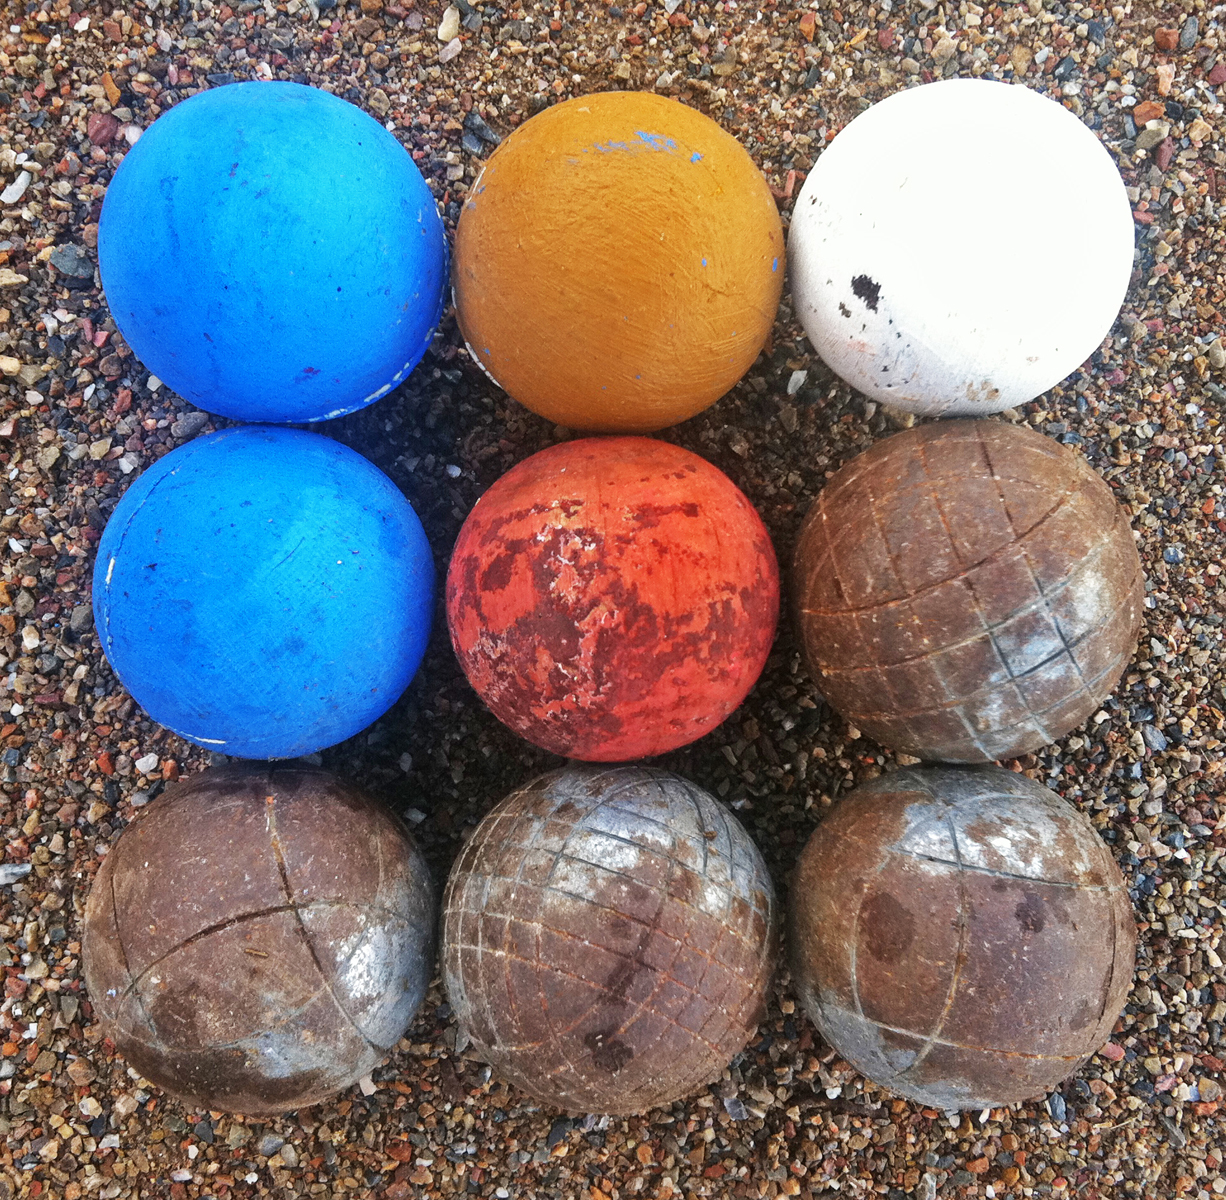 Nine bocci balls, some metal, others bright painted wood, arranged in a square.